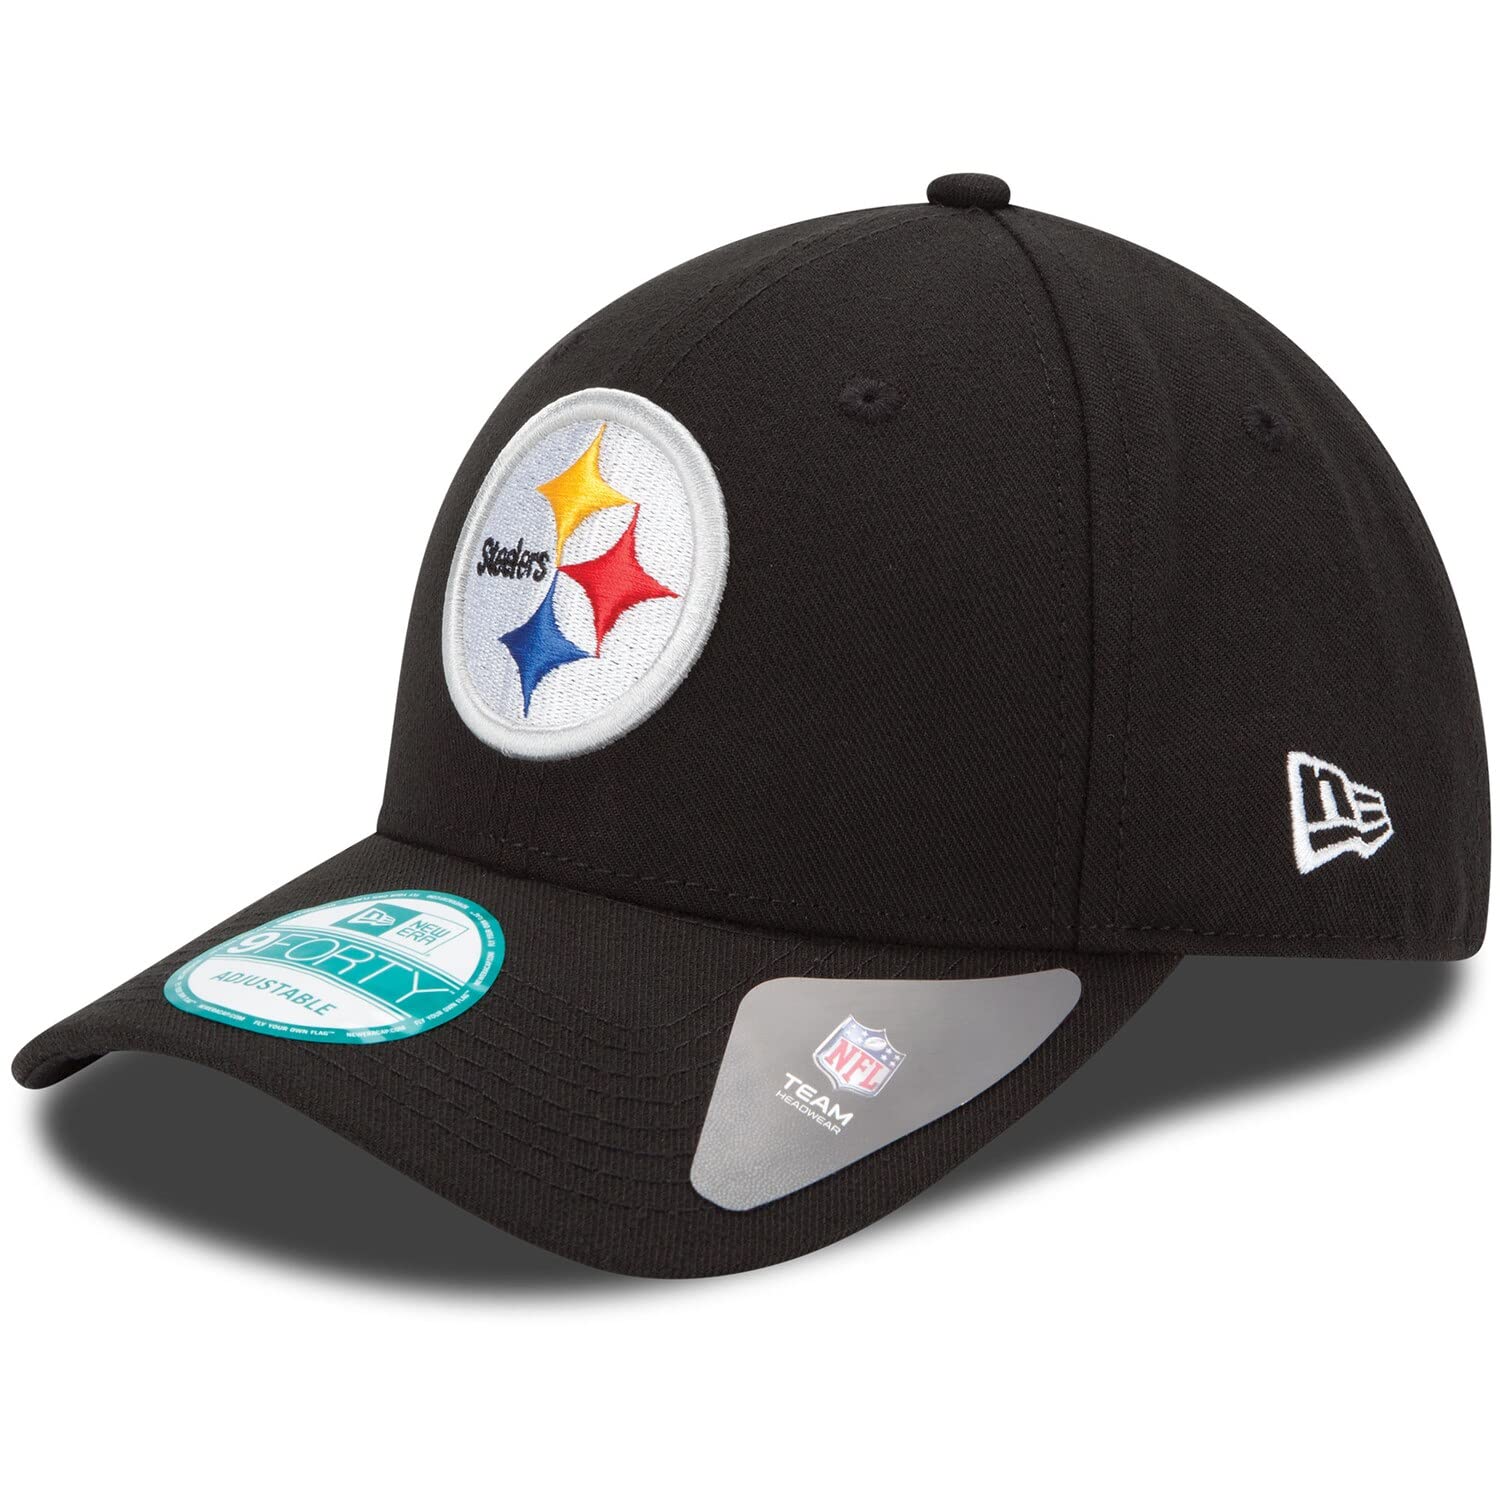 New Era NFL The League 9FORTY Adjustable Cap - Caps Fitted Caps Fitted Pittsburgh Steelers / One Size Caps